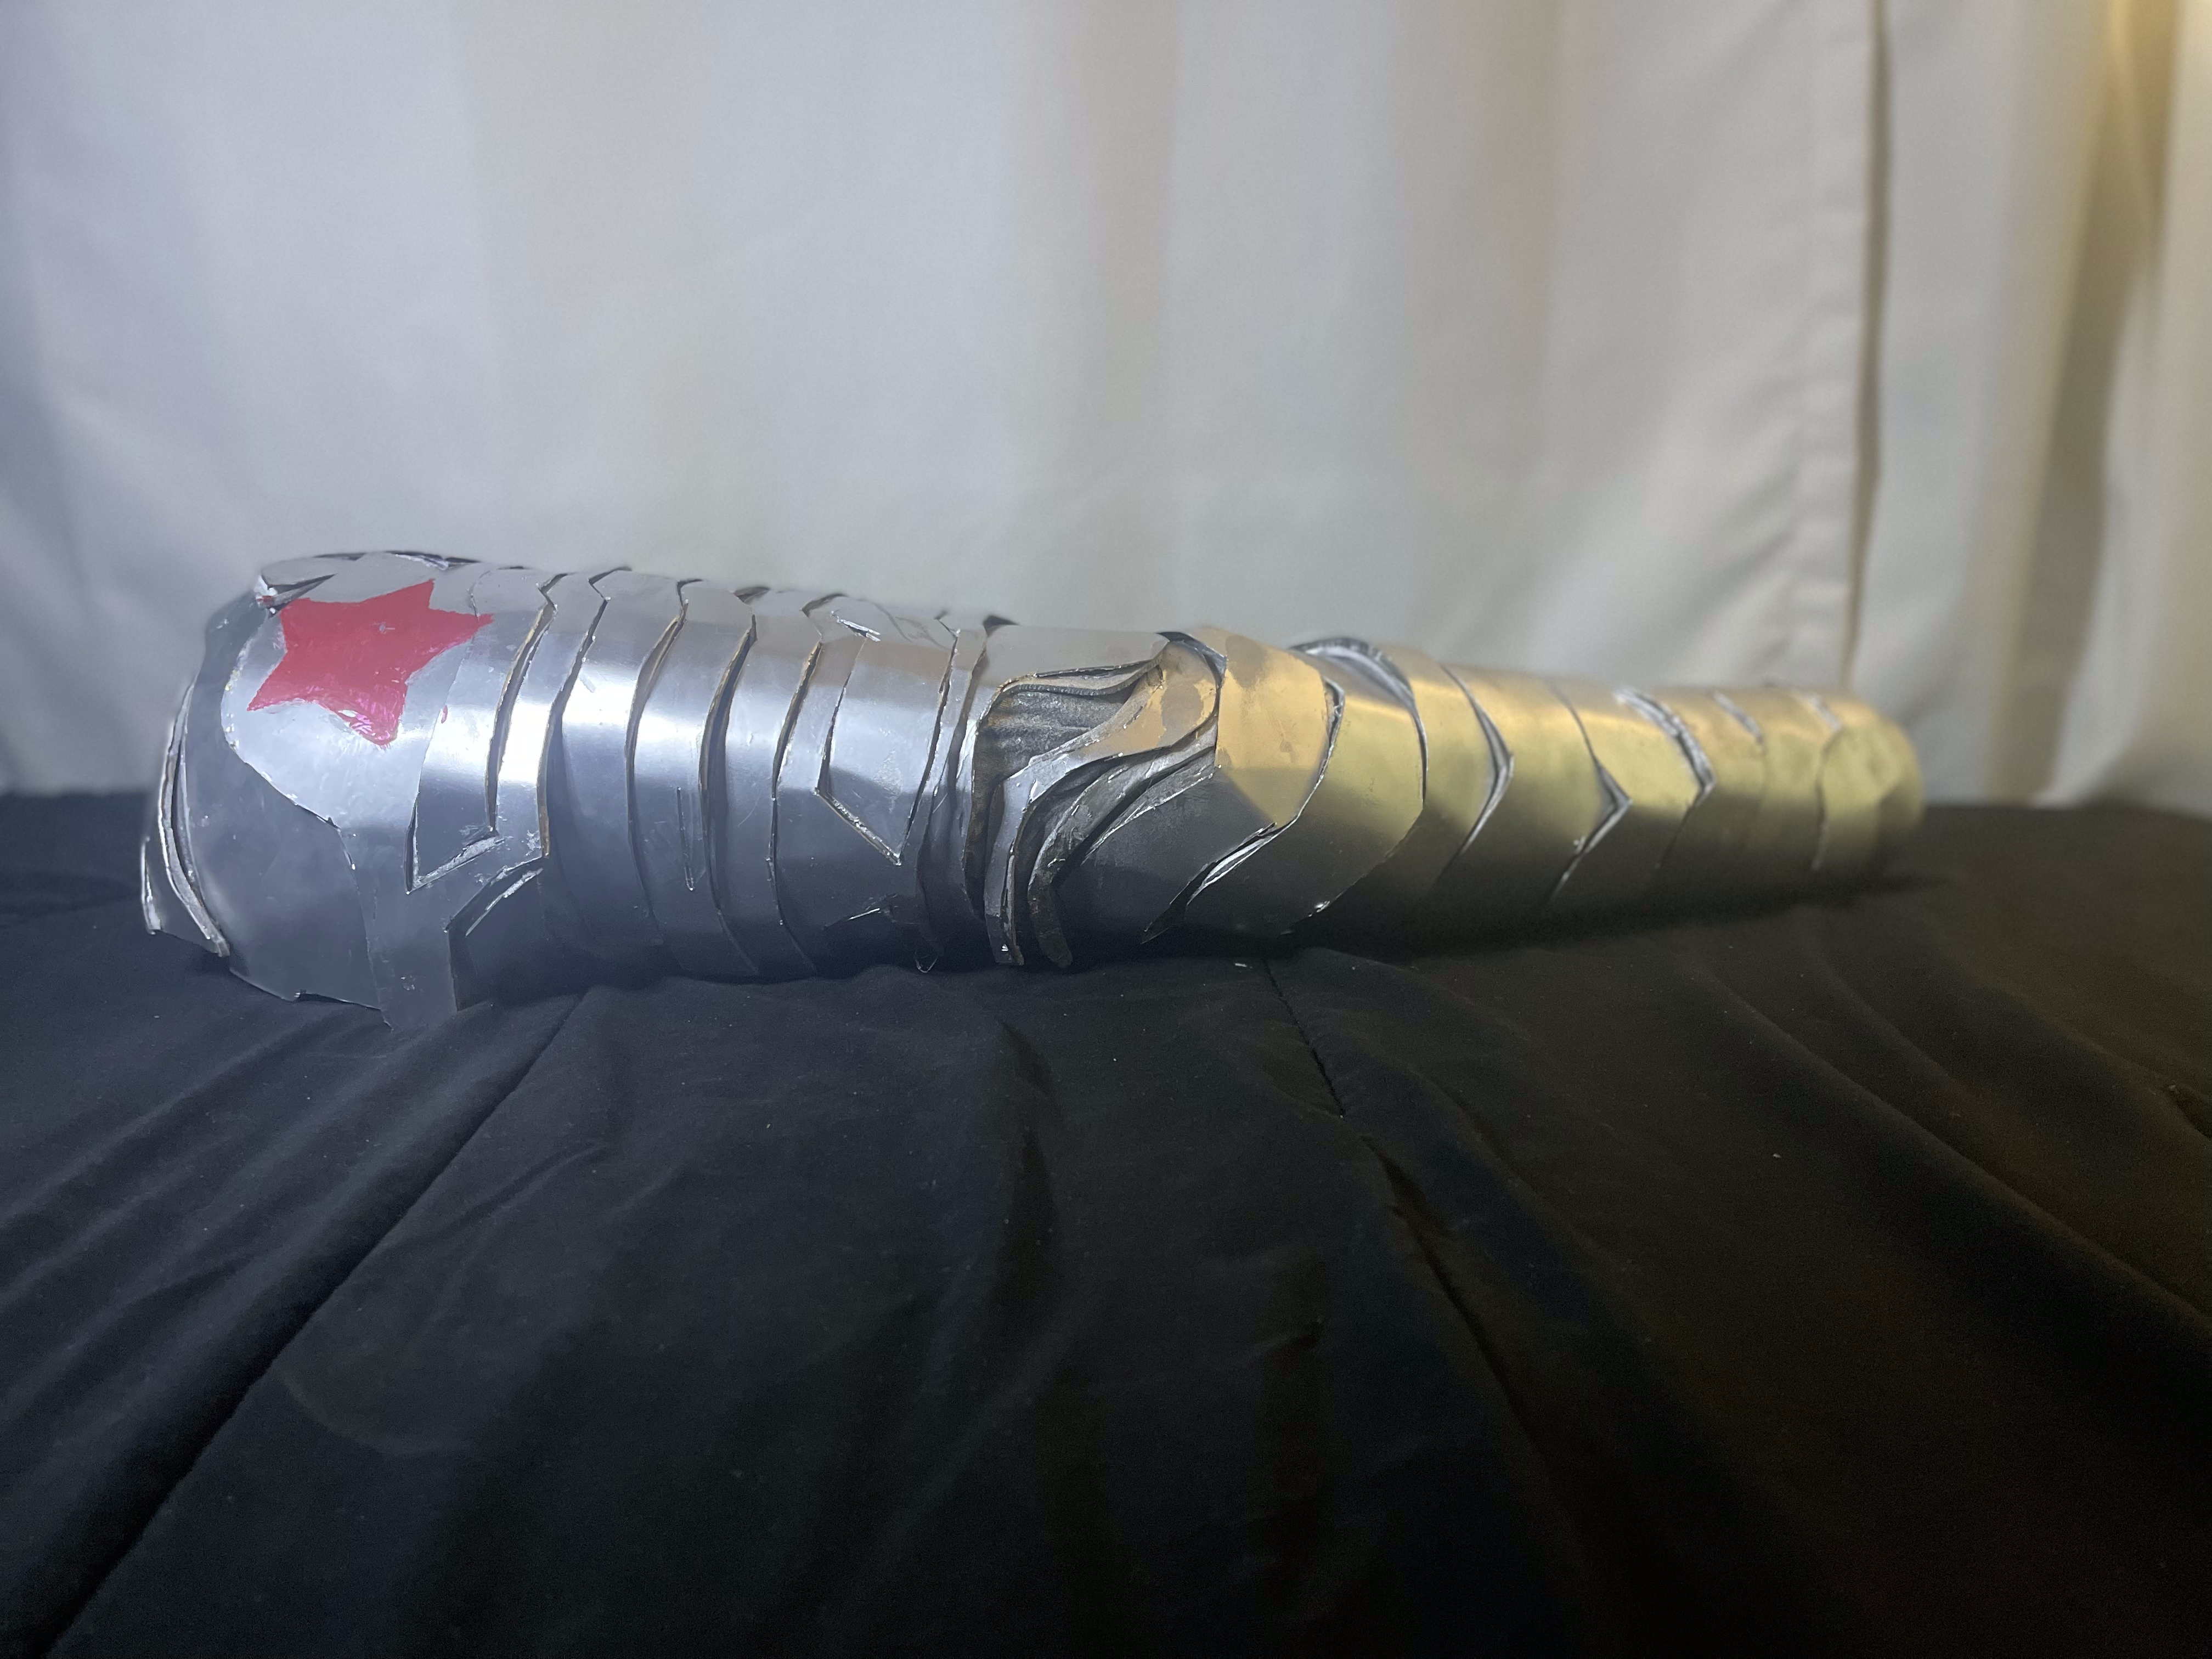 The Winter Soldier Metal Arm